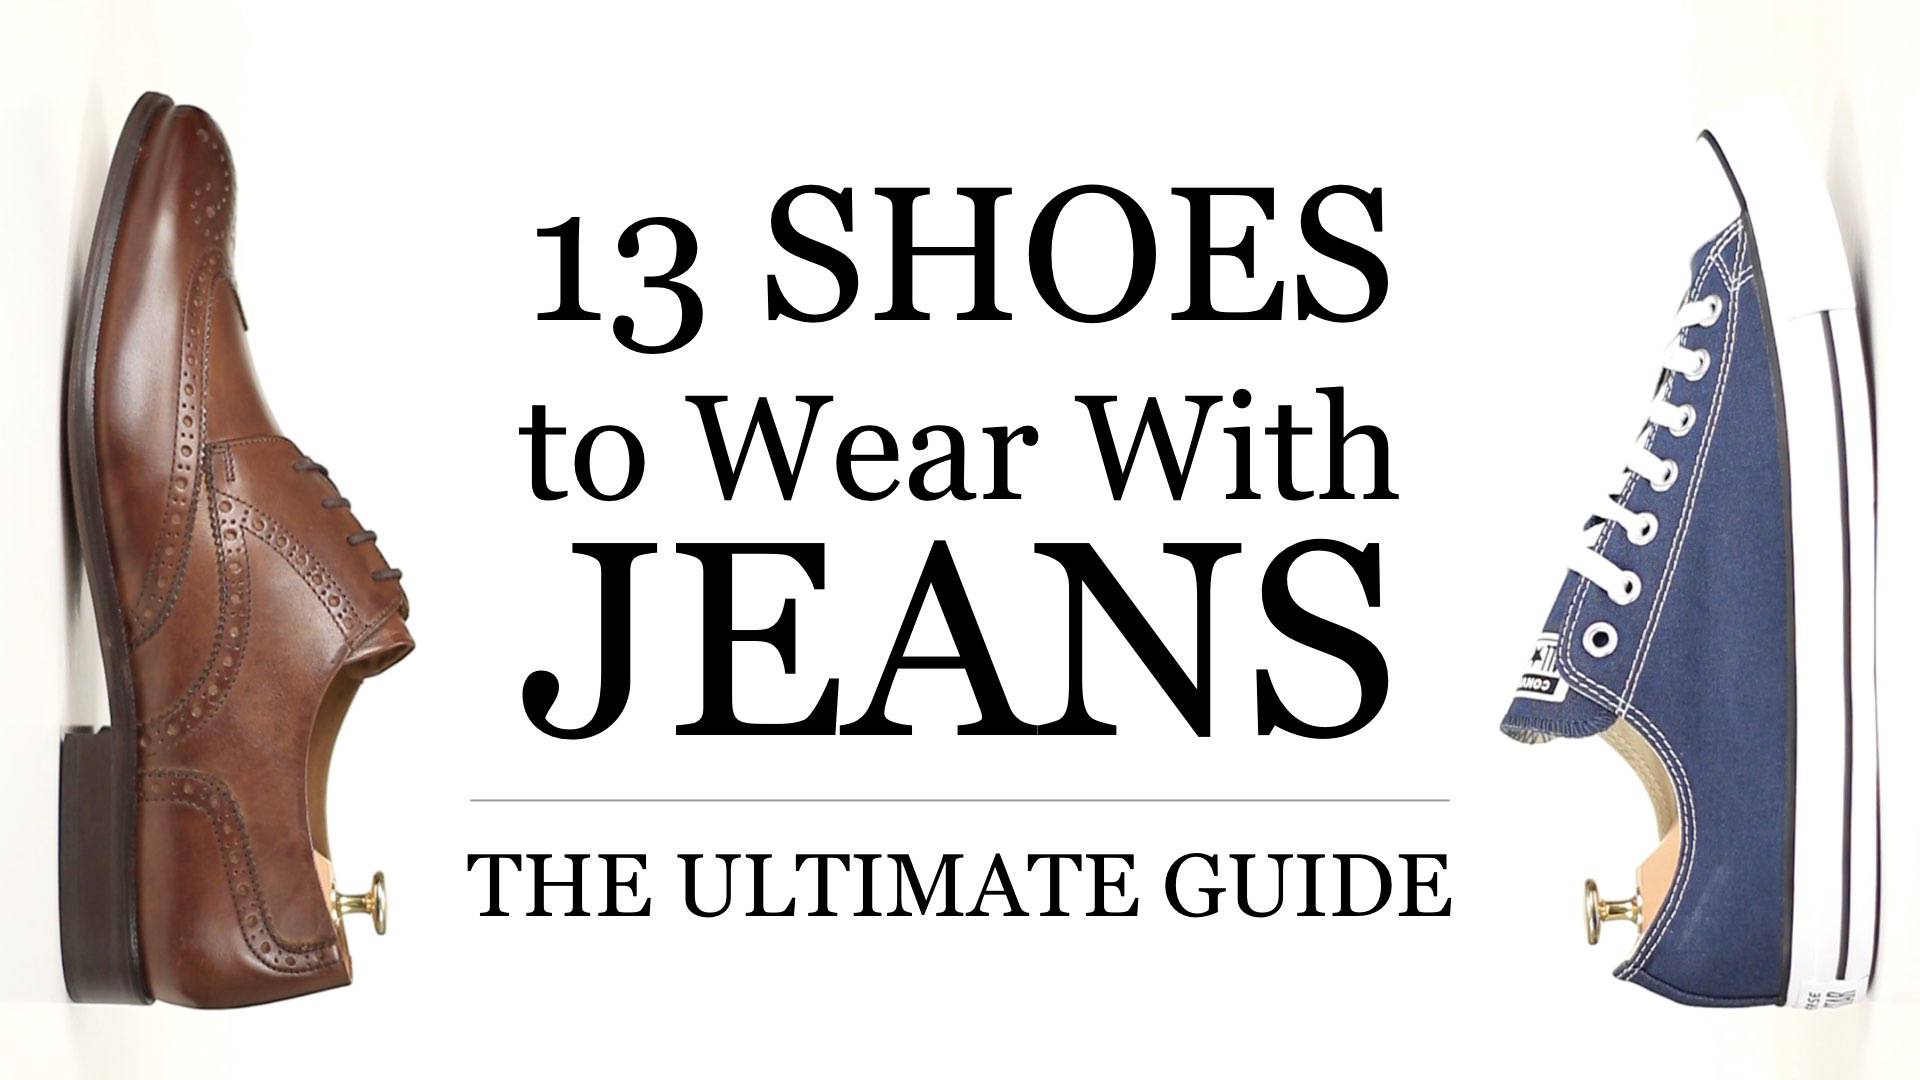 With shoes that jeans mens go Best Men's